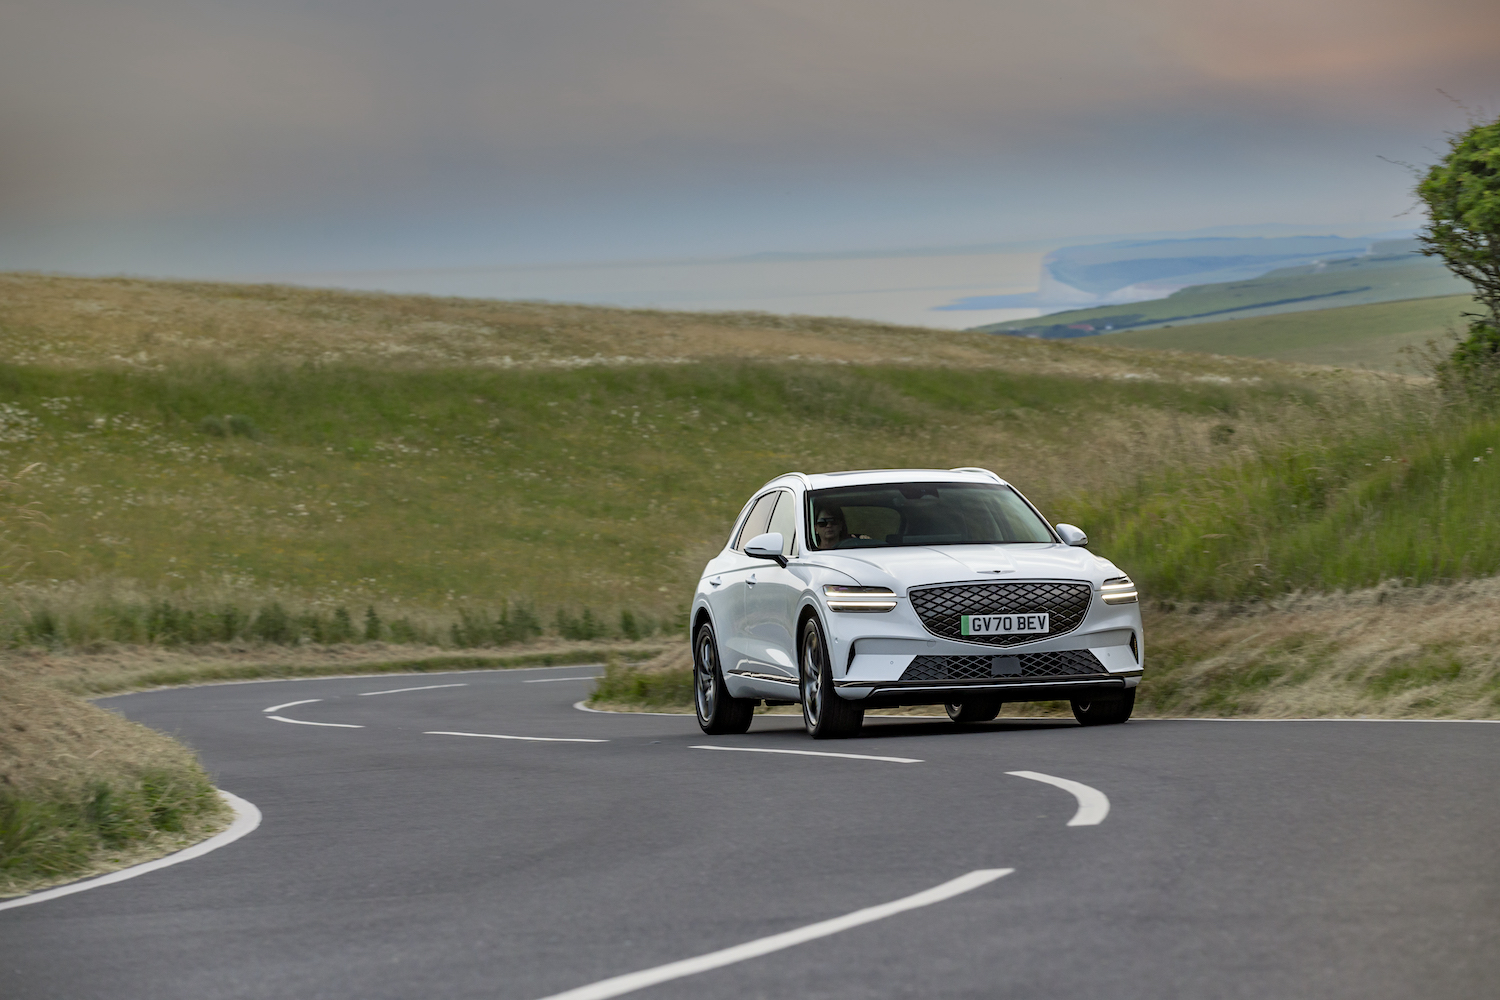 The Genesis GV70 Electrified driving on an open road with green hills in the rear